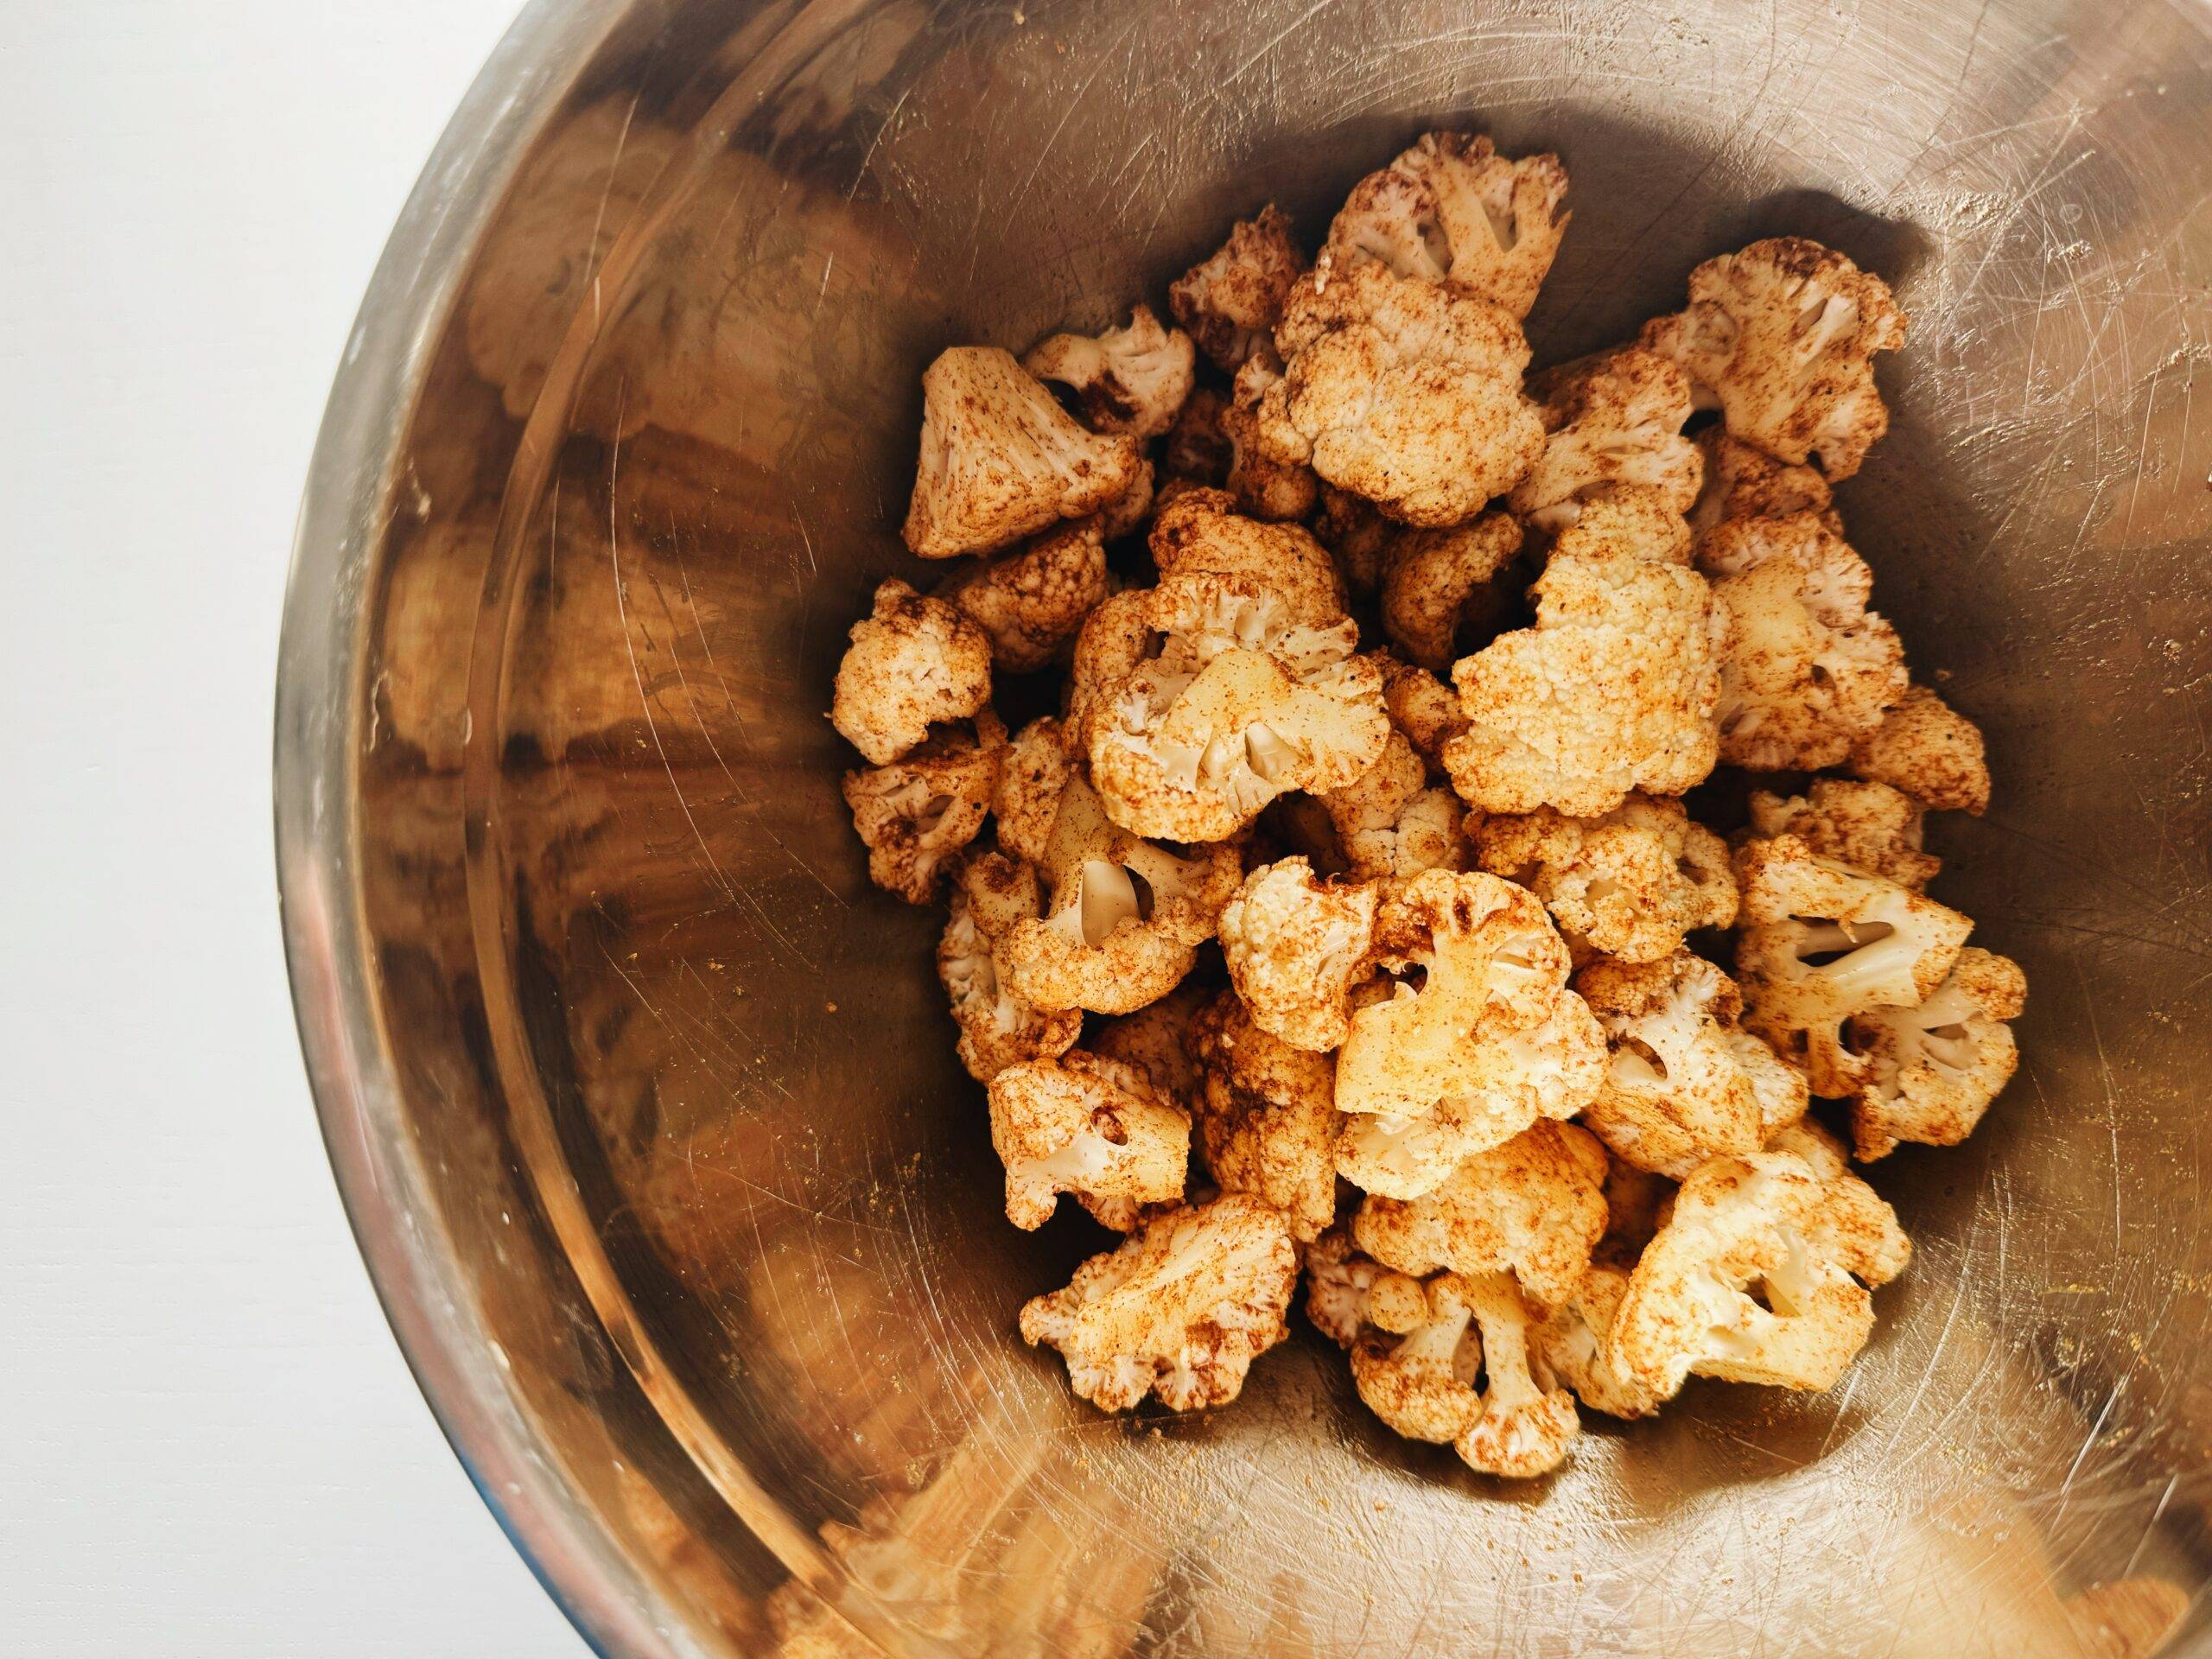 Raw cauliflower in a bowl tossed in spices.